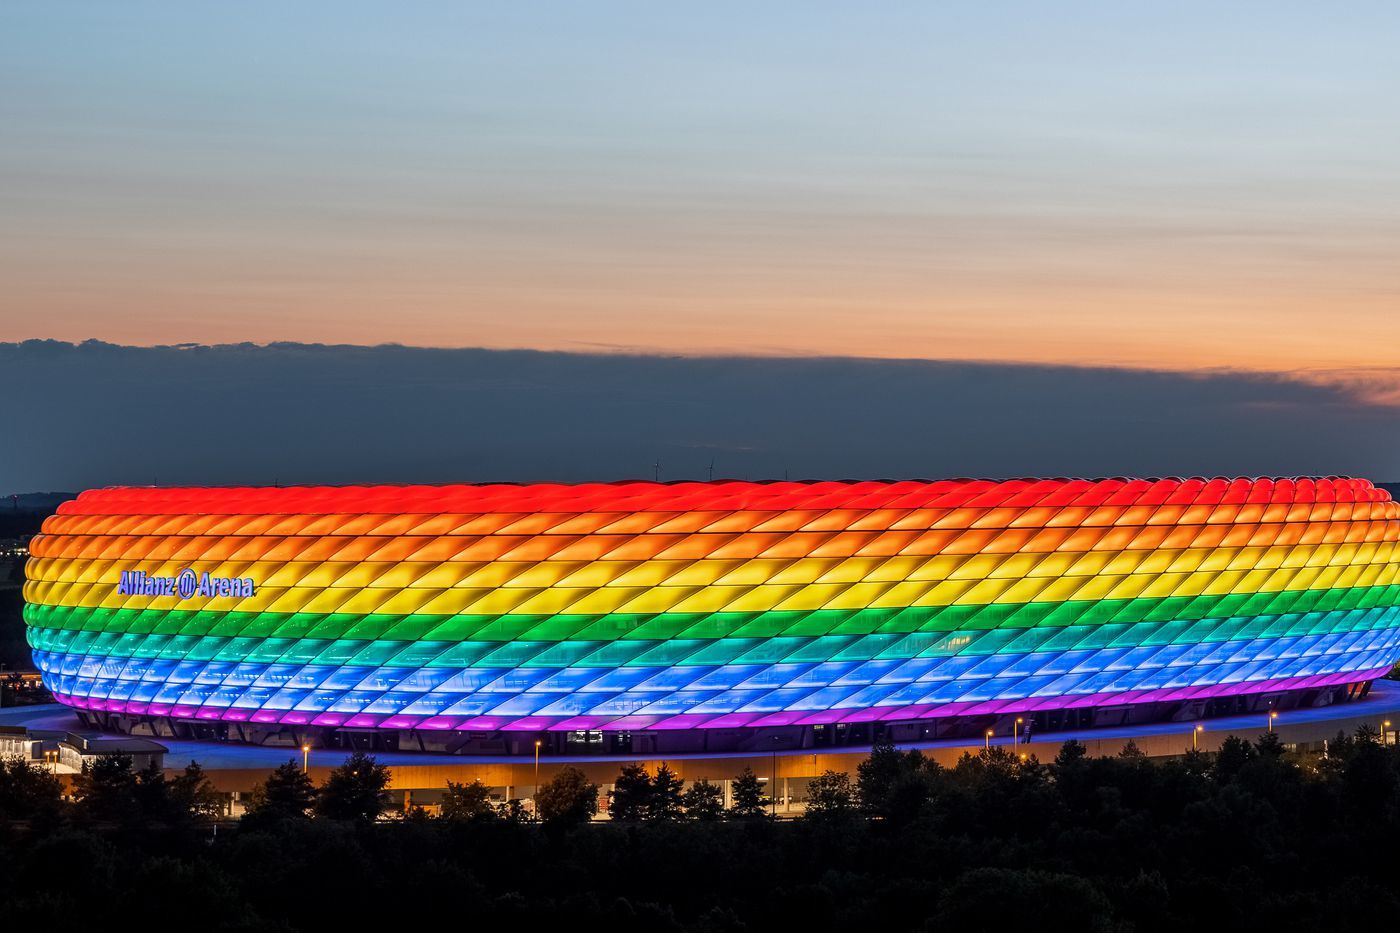 FIFA allows LGBT support in Qatar starting from second round of the group stage of 2022 World Cup